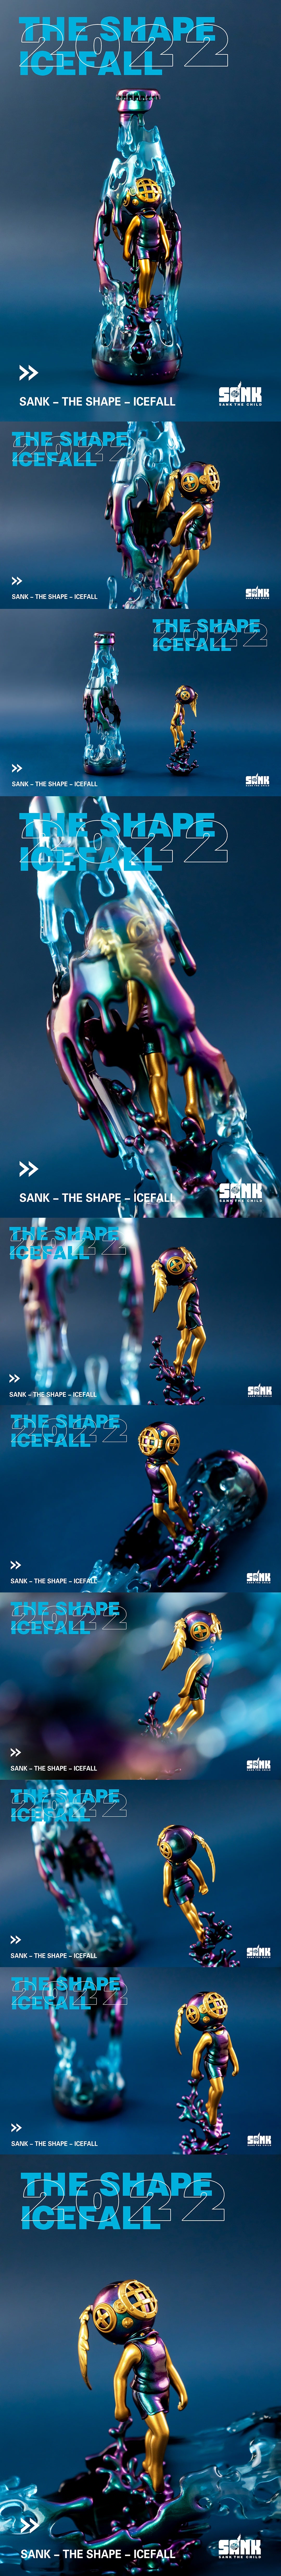 SANK TOYS Sank The Shape Icefall Collectible Figurine